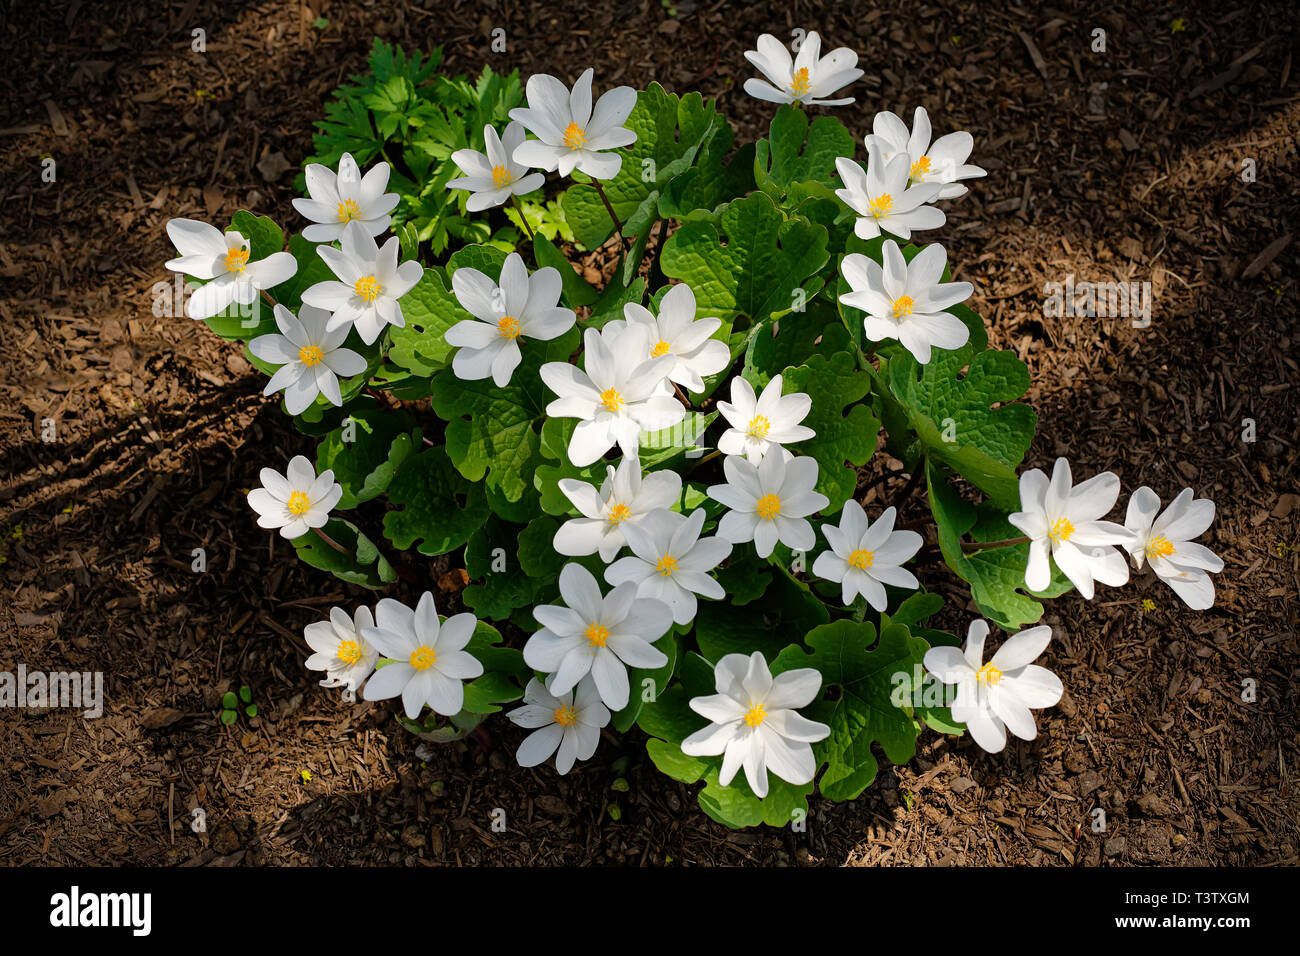 Sanguinaria canadensis, know as bloodroot, is a perennial, herbaceous flowering plant grown in the home garden but a plant that native to eastern NA. Stock Photo